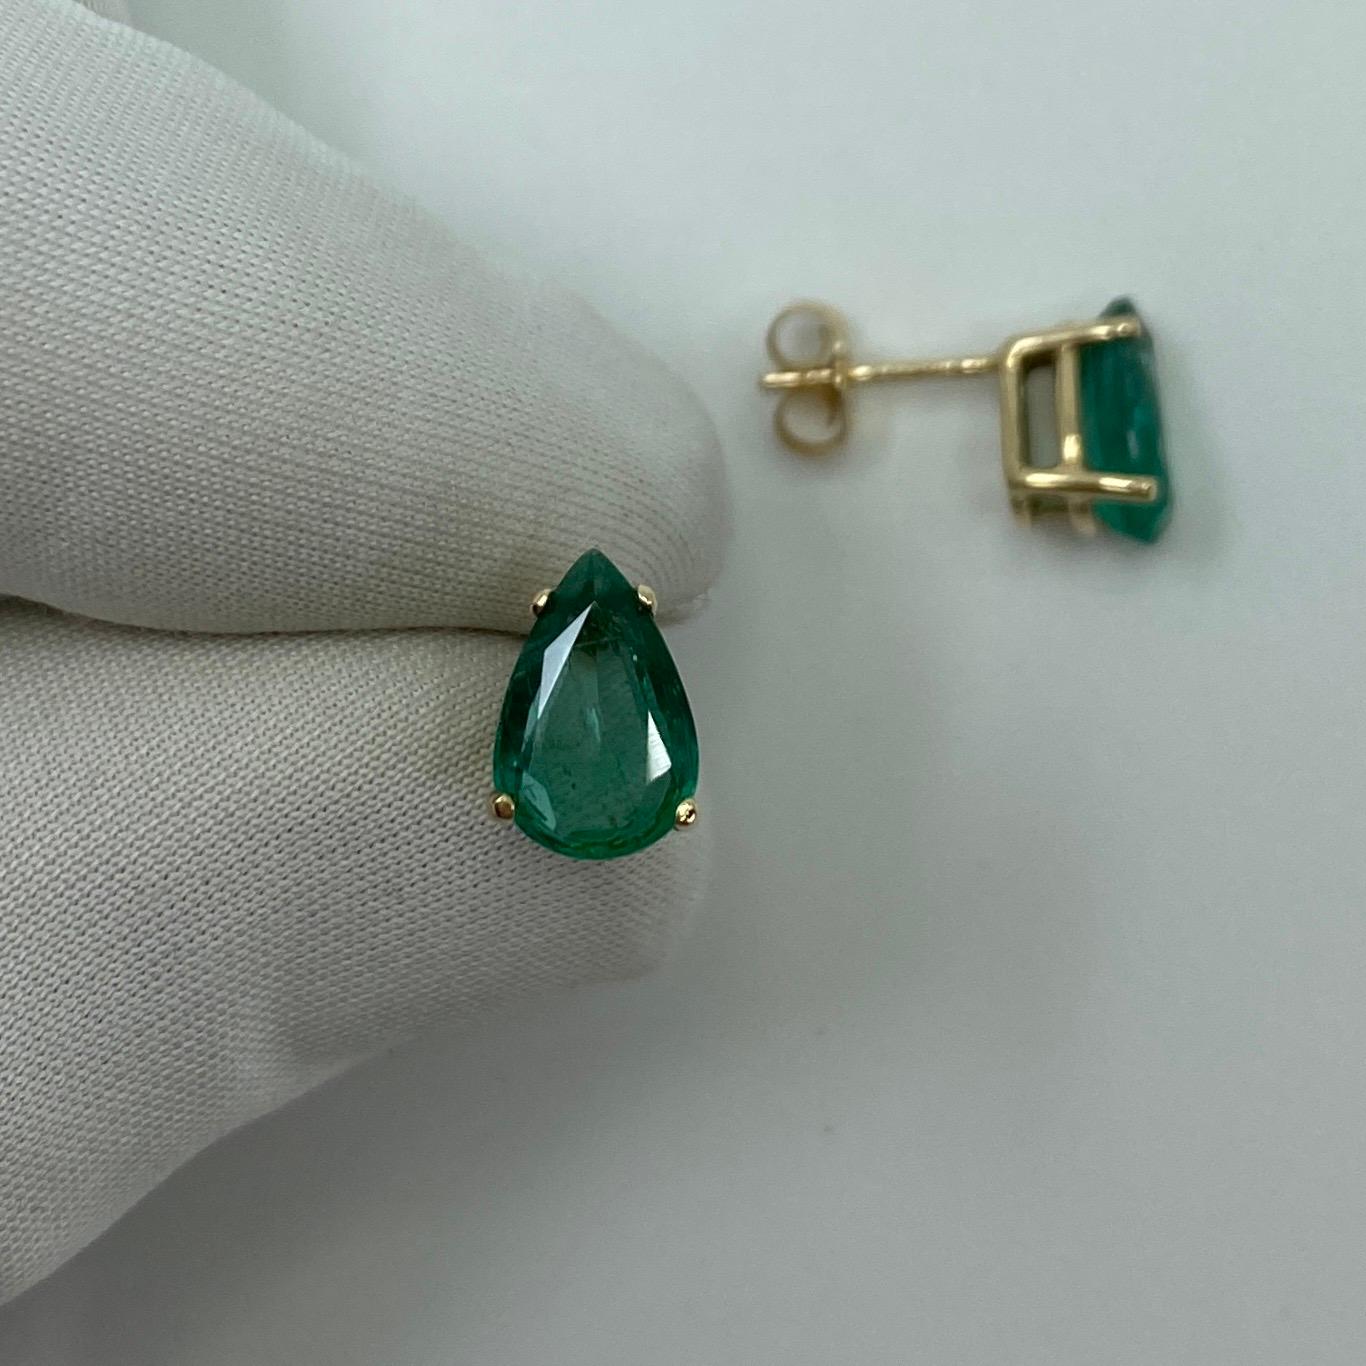 Fine Natural Deep Green Emerald Earring Studs.

2.80 carat pair of beautiful matching emeralds, set in fine 14k yellow gold earring settings.

The colour on these is truly beautiful, a deep green colour and very well matching. Notoriously difficult